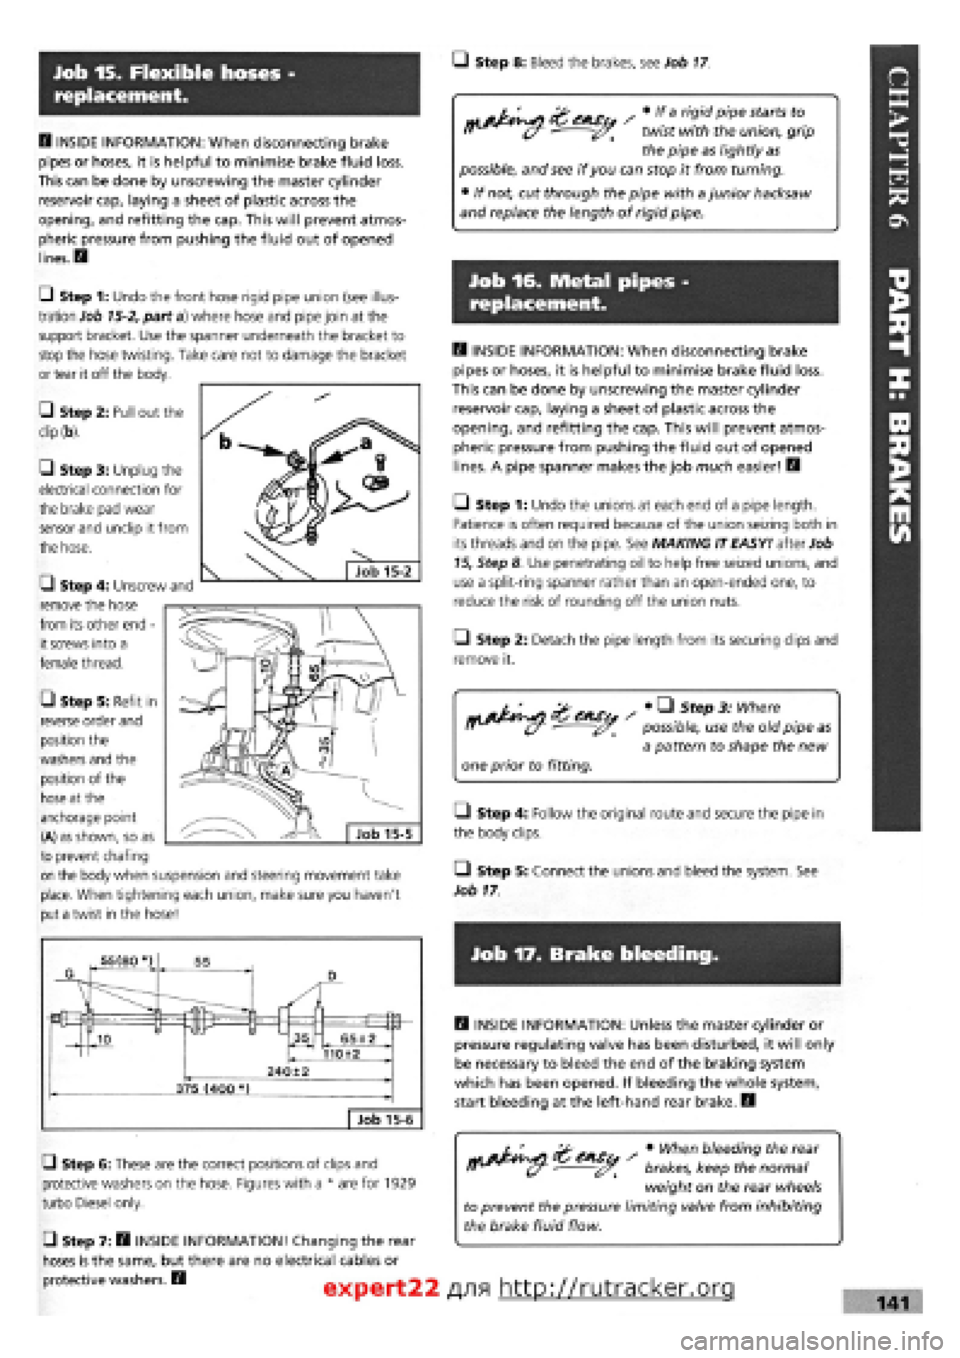 FIAT TEMPRA 1988  Service And Repair Manual 
Job 15. Flexible hoses -
replacement. 
• Step 8: Bleed the brakes, see Job
 17 

H INSIDE INFORMATION: When disconnecting brake 
pipes or hoses, it is helpful to minimise brake fluid loss. 
This ca